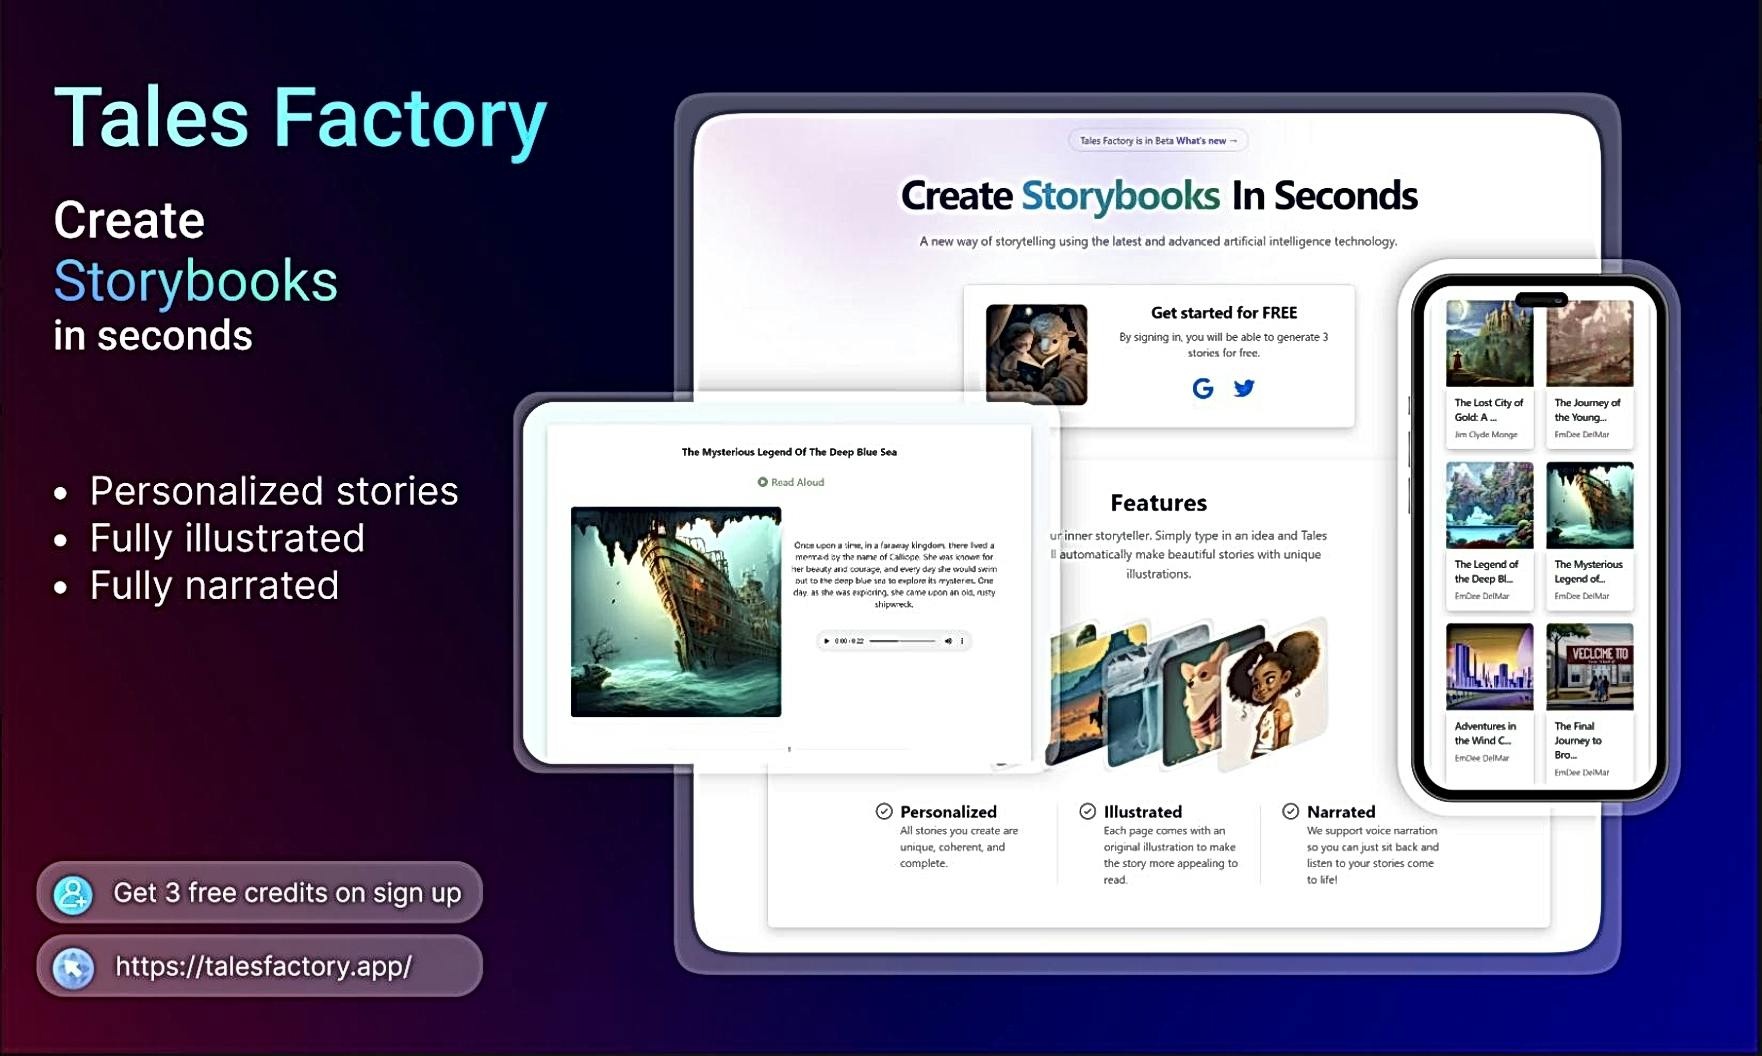 Tales Factory featured